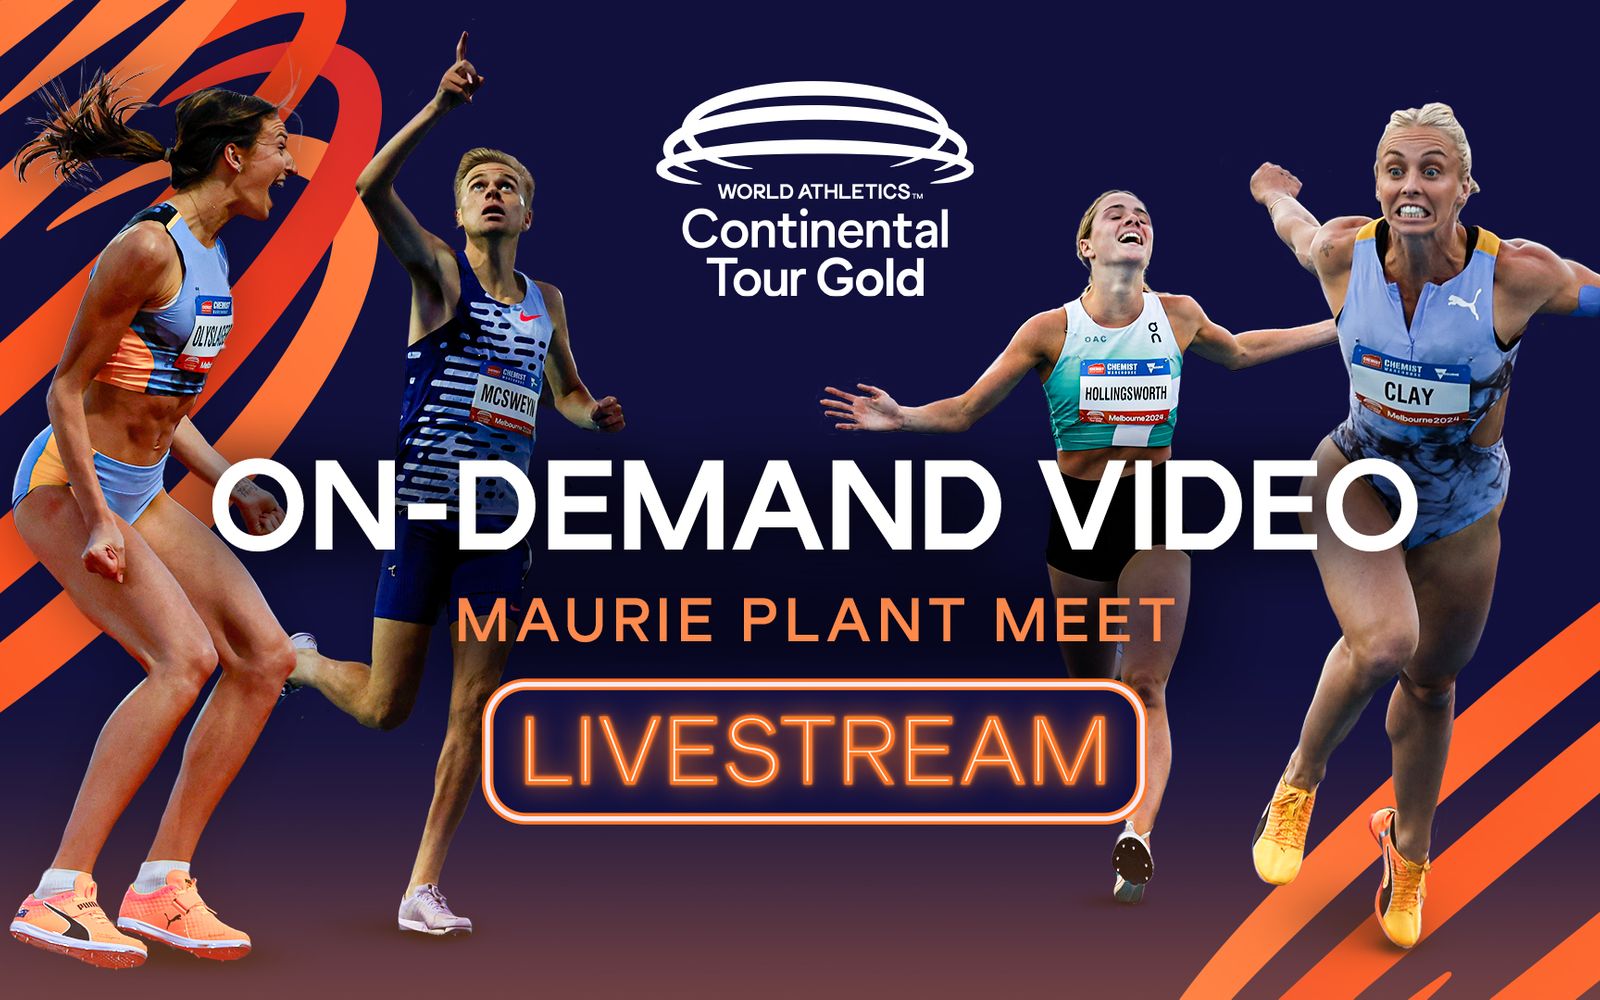 Maurie Plant Meet on demand video